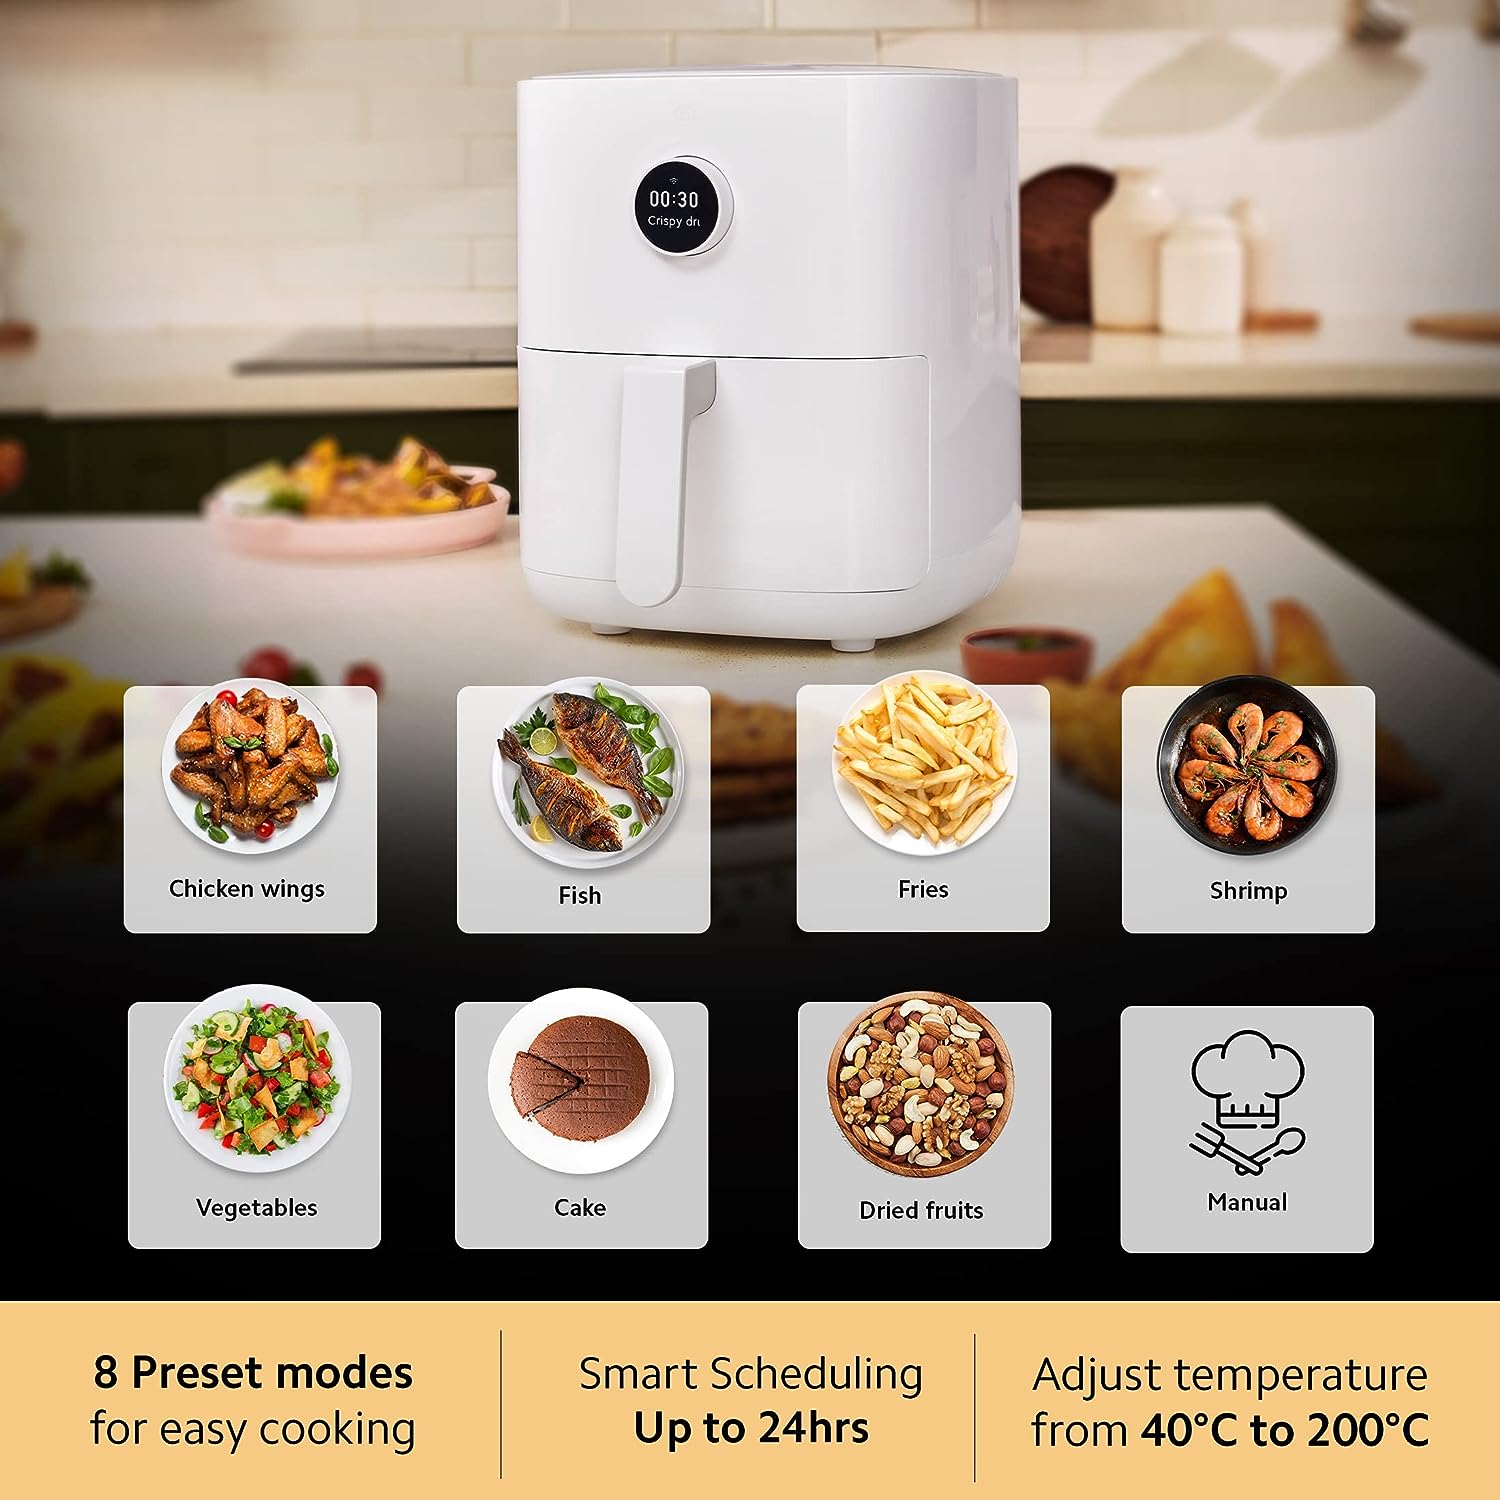 Xiaomi Smart Air Fryer for 4-5 People, 90% Less Fat l 1500W Fast Cooking, 7 Pre-set Menus, Grill, Bake, Fry, Roast, Reheat, Defrost, 40-200°C l  Dual Speed Technology, Voice Control